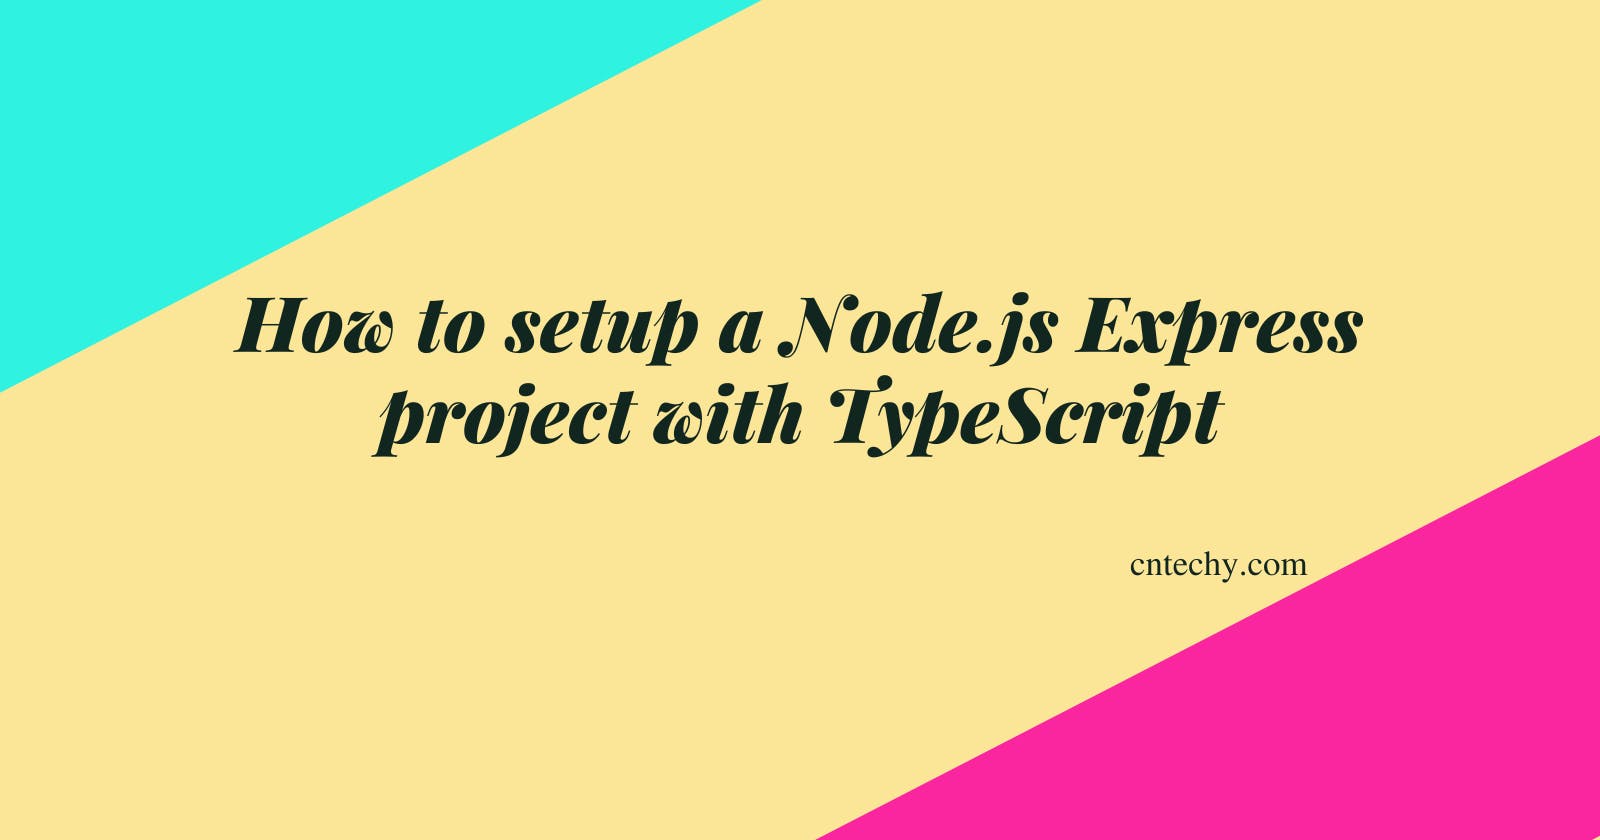 How to setup a Node.js Express project with TypeScript